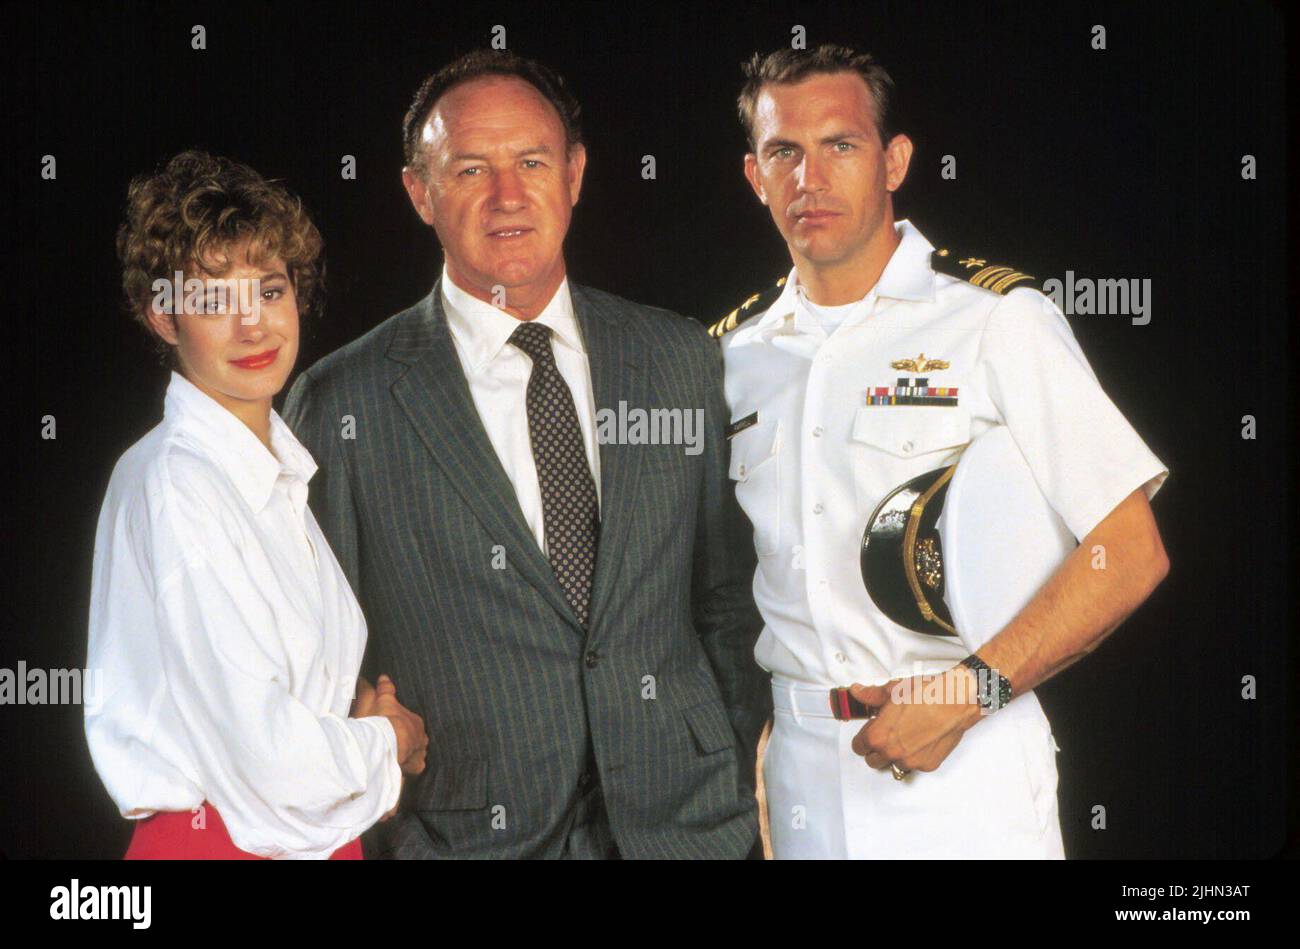 SEAN YOUNG, GENE HACKMAN, KEVIN COSTNER, NO WAY OUT, 1987 Stock Photo